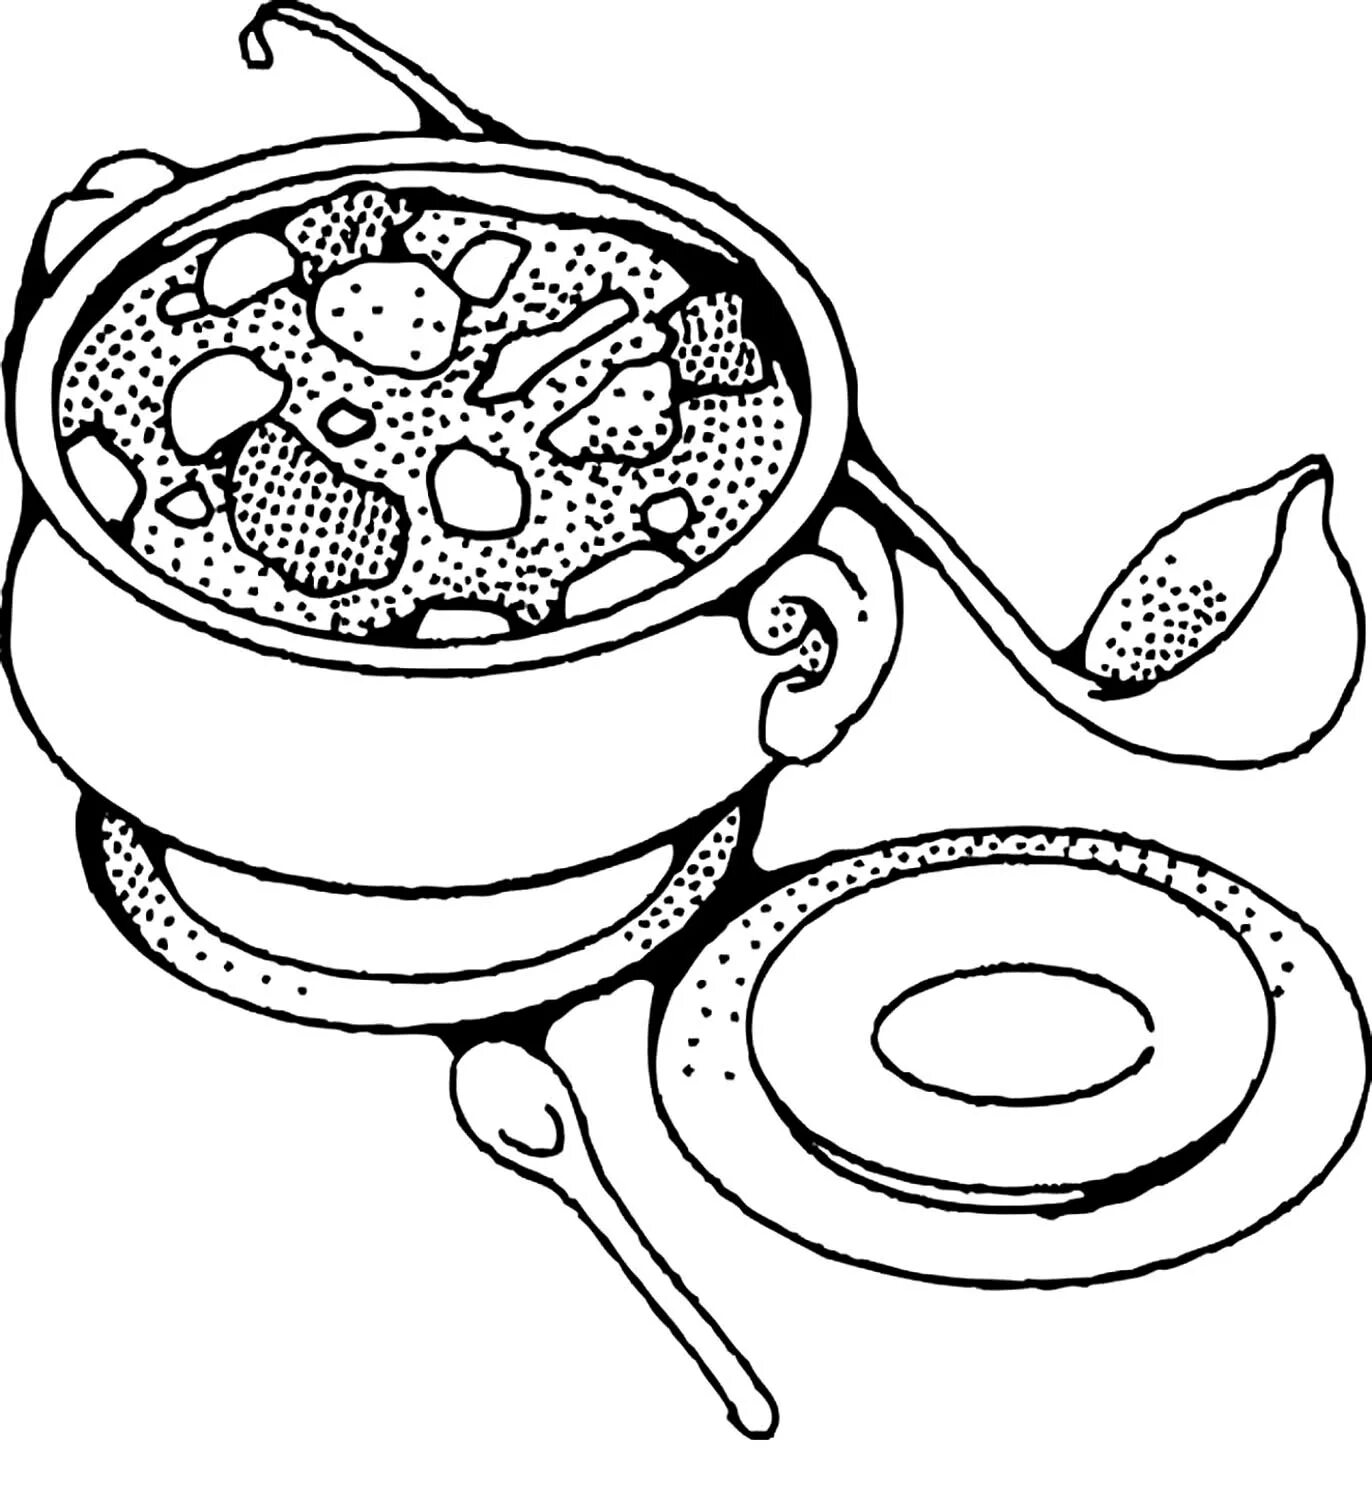 Coloring page elegant russian cuisine